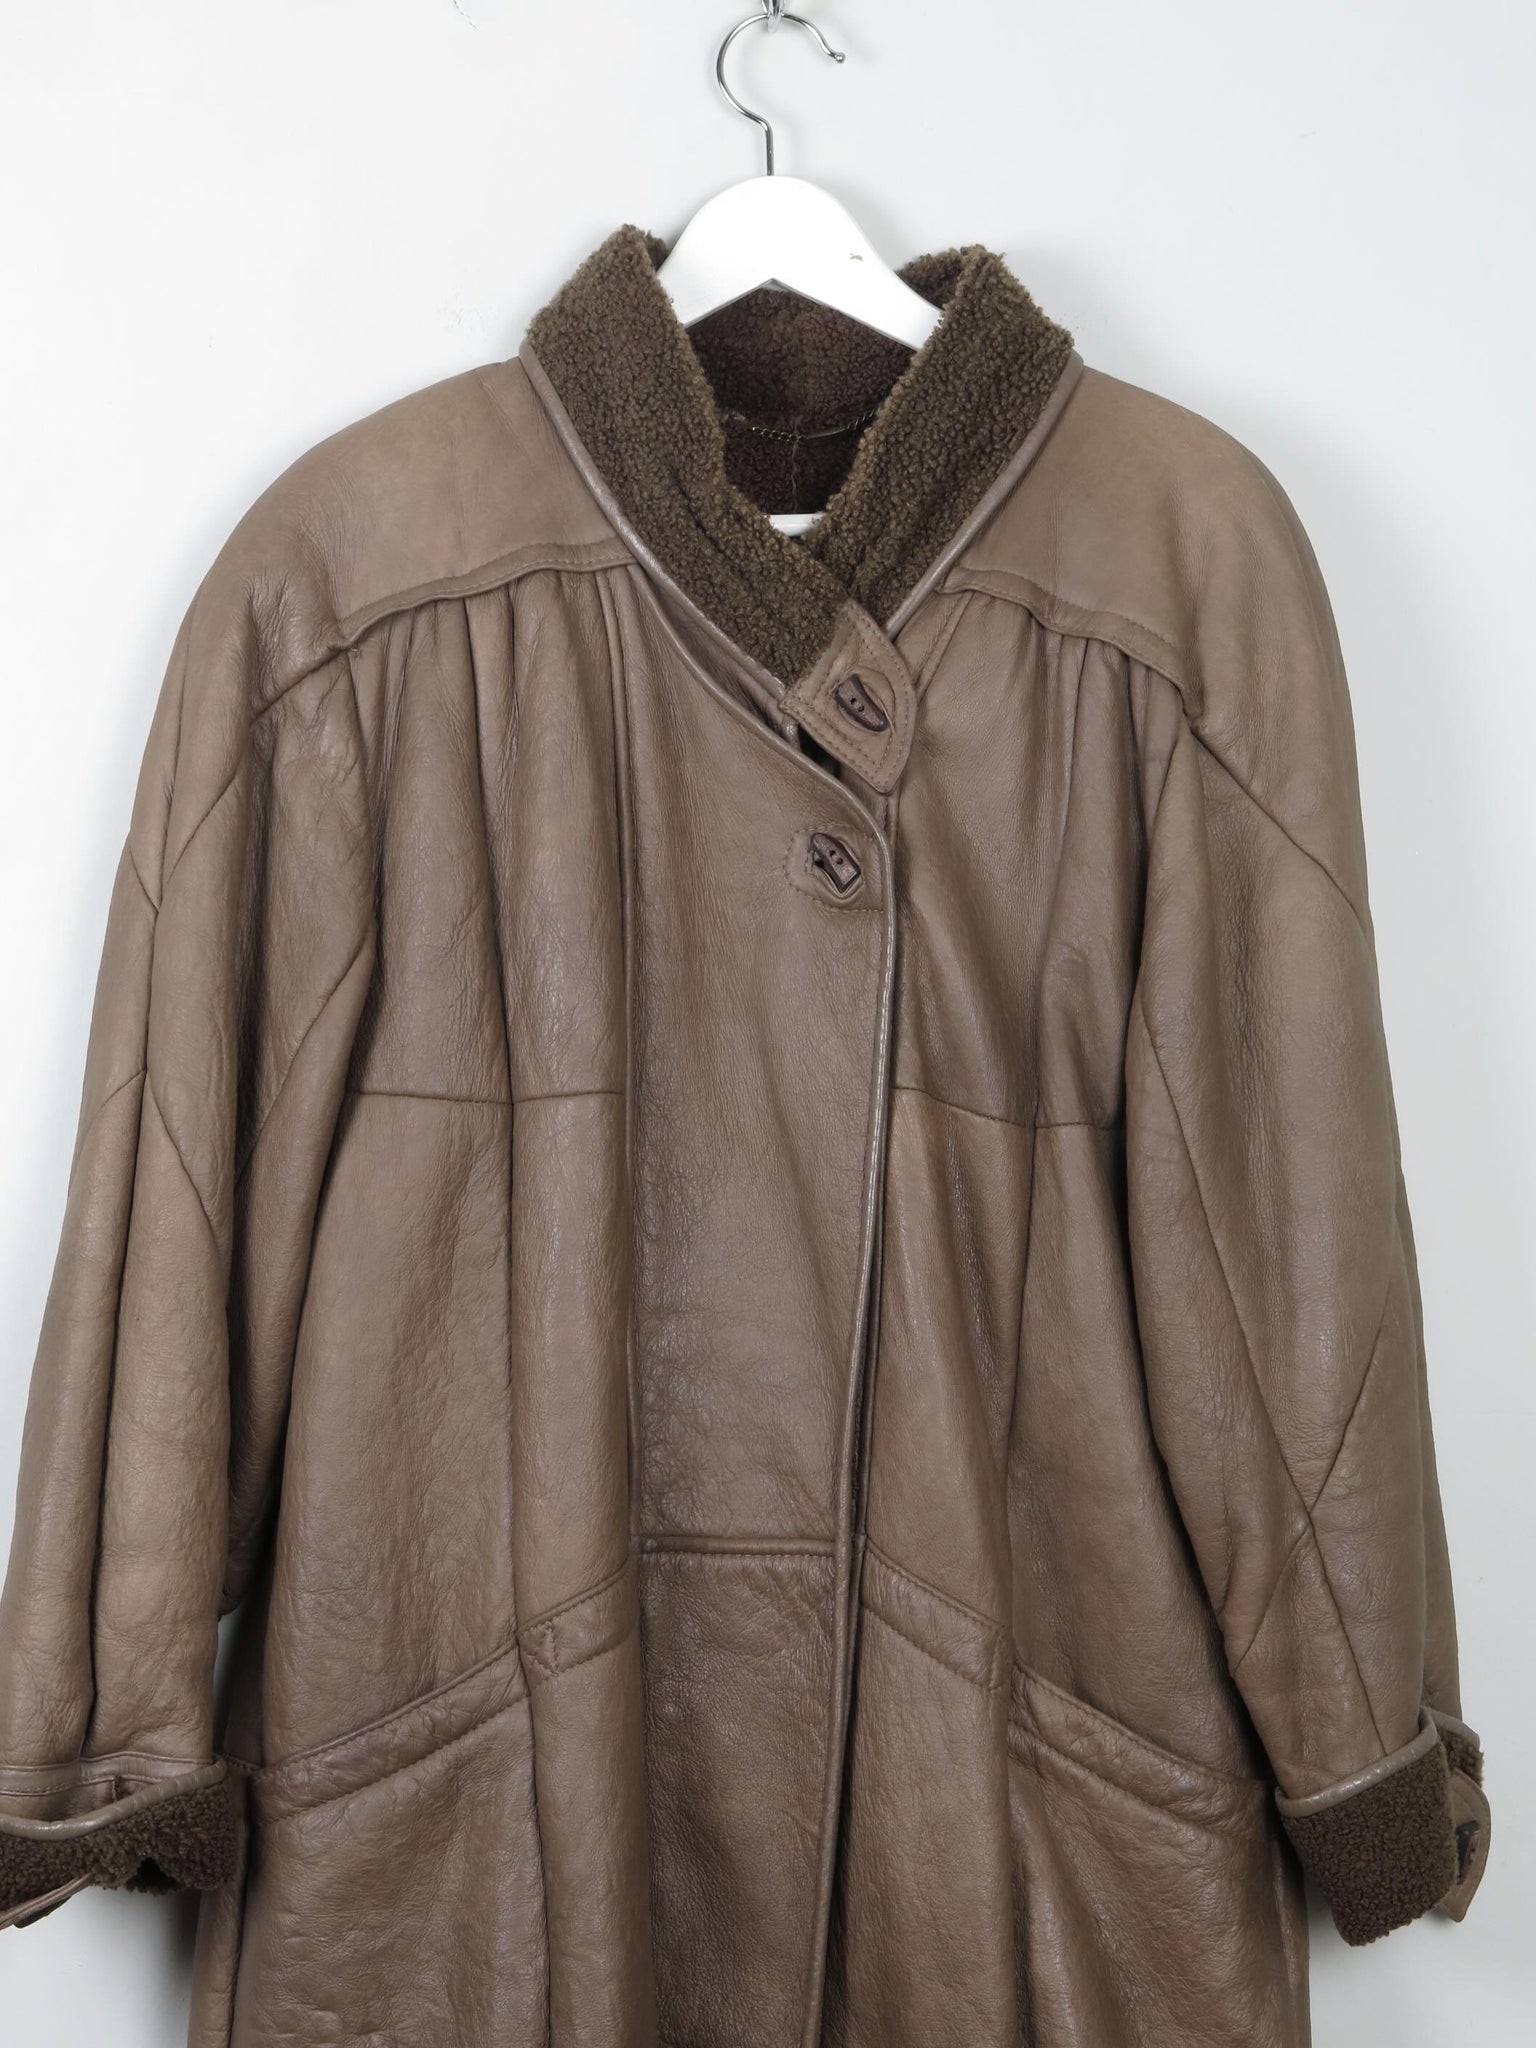 Women's Coffee Brown Vintage Shearling Short Coat M/L - The Harlequin